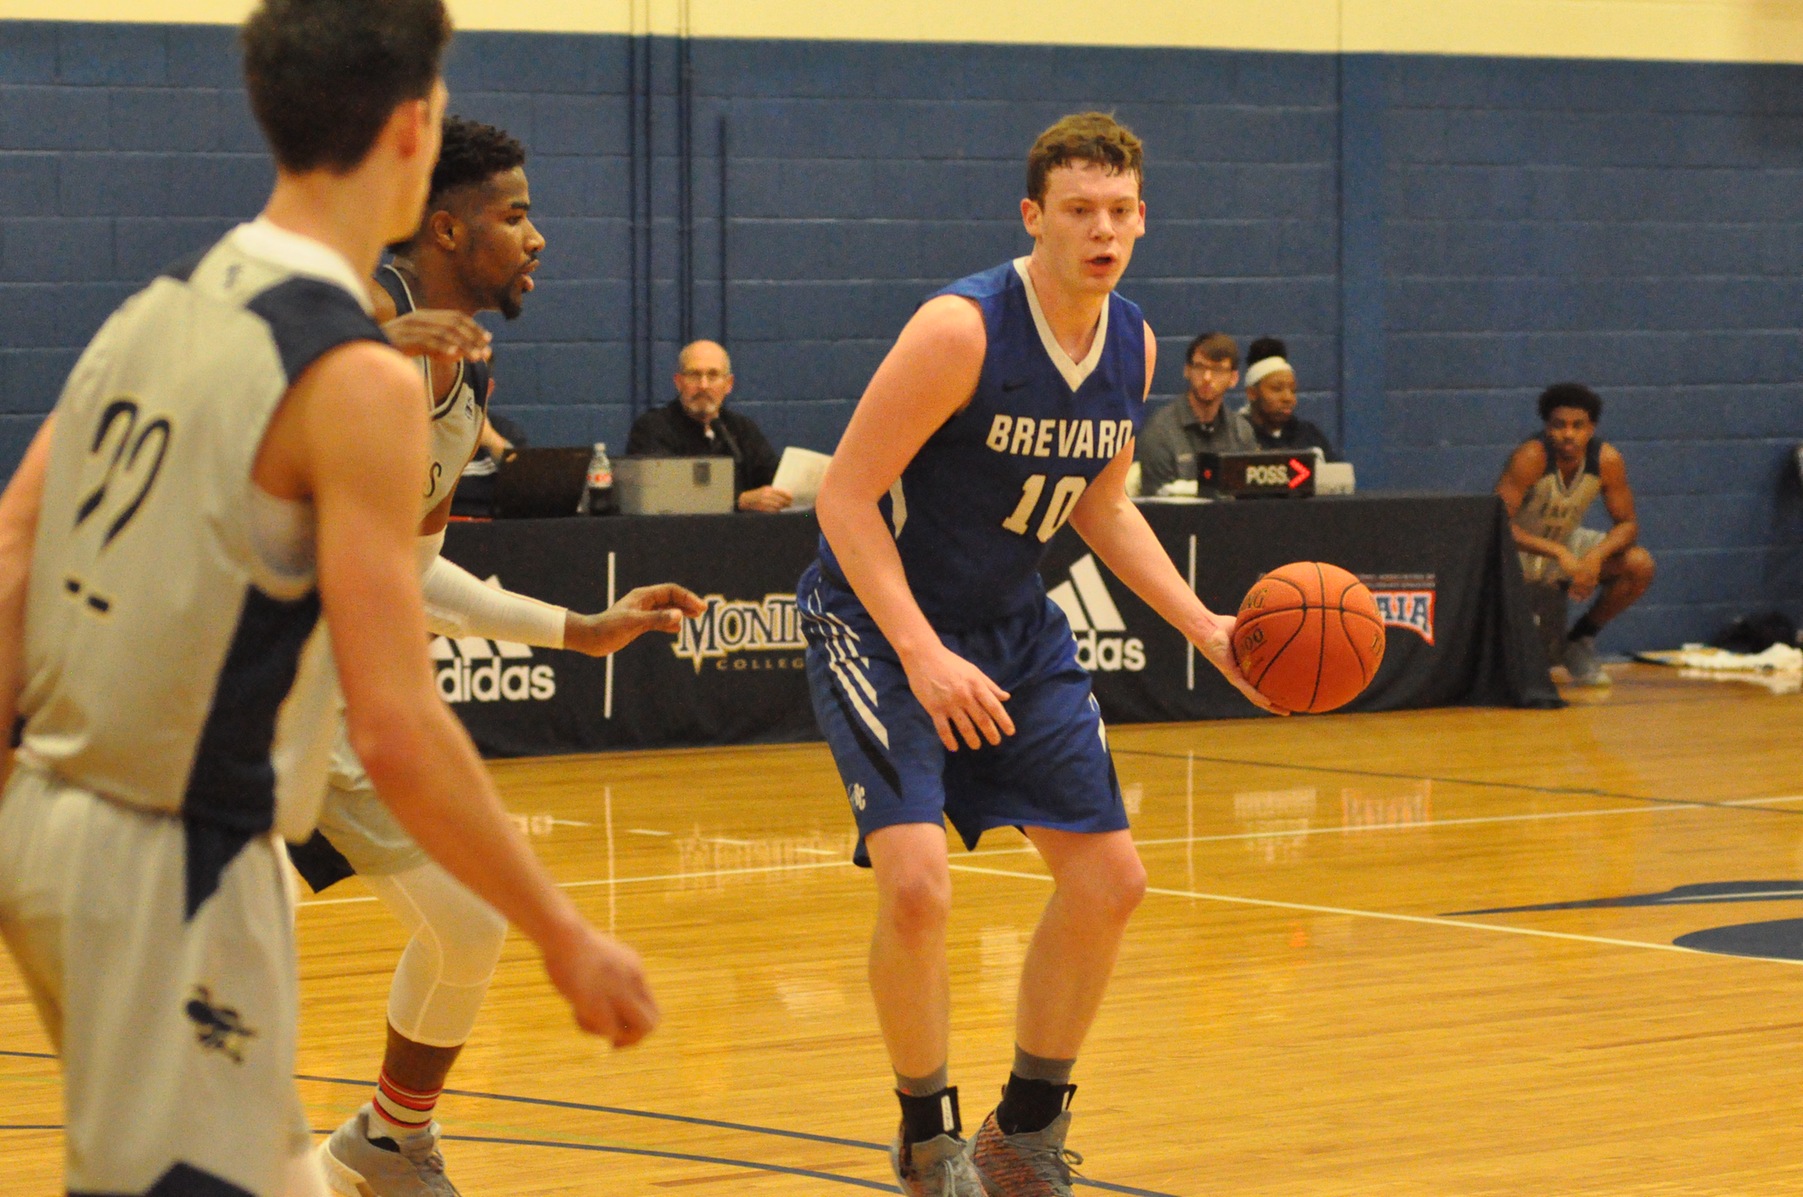 Montreat Tops Brevard on New Year’s Eve